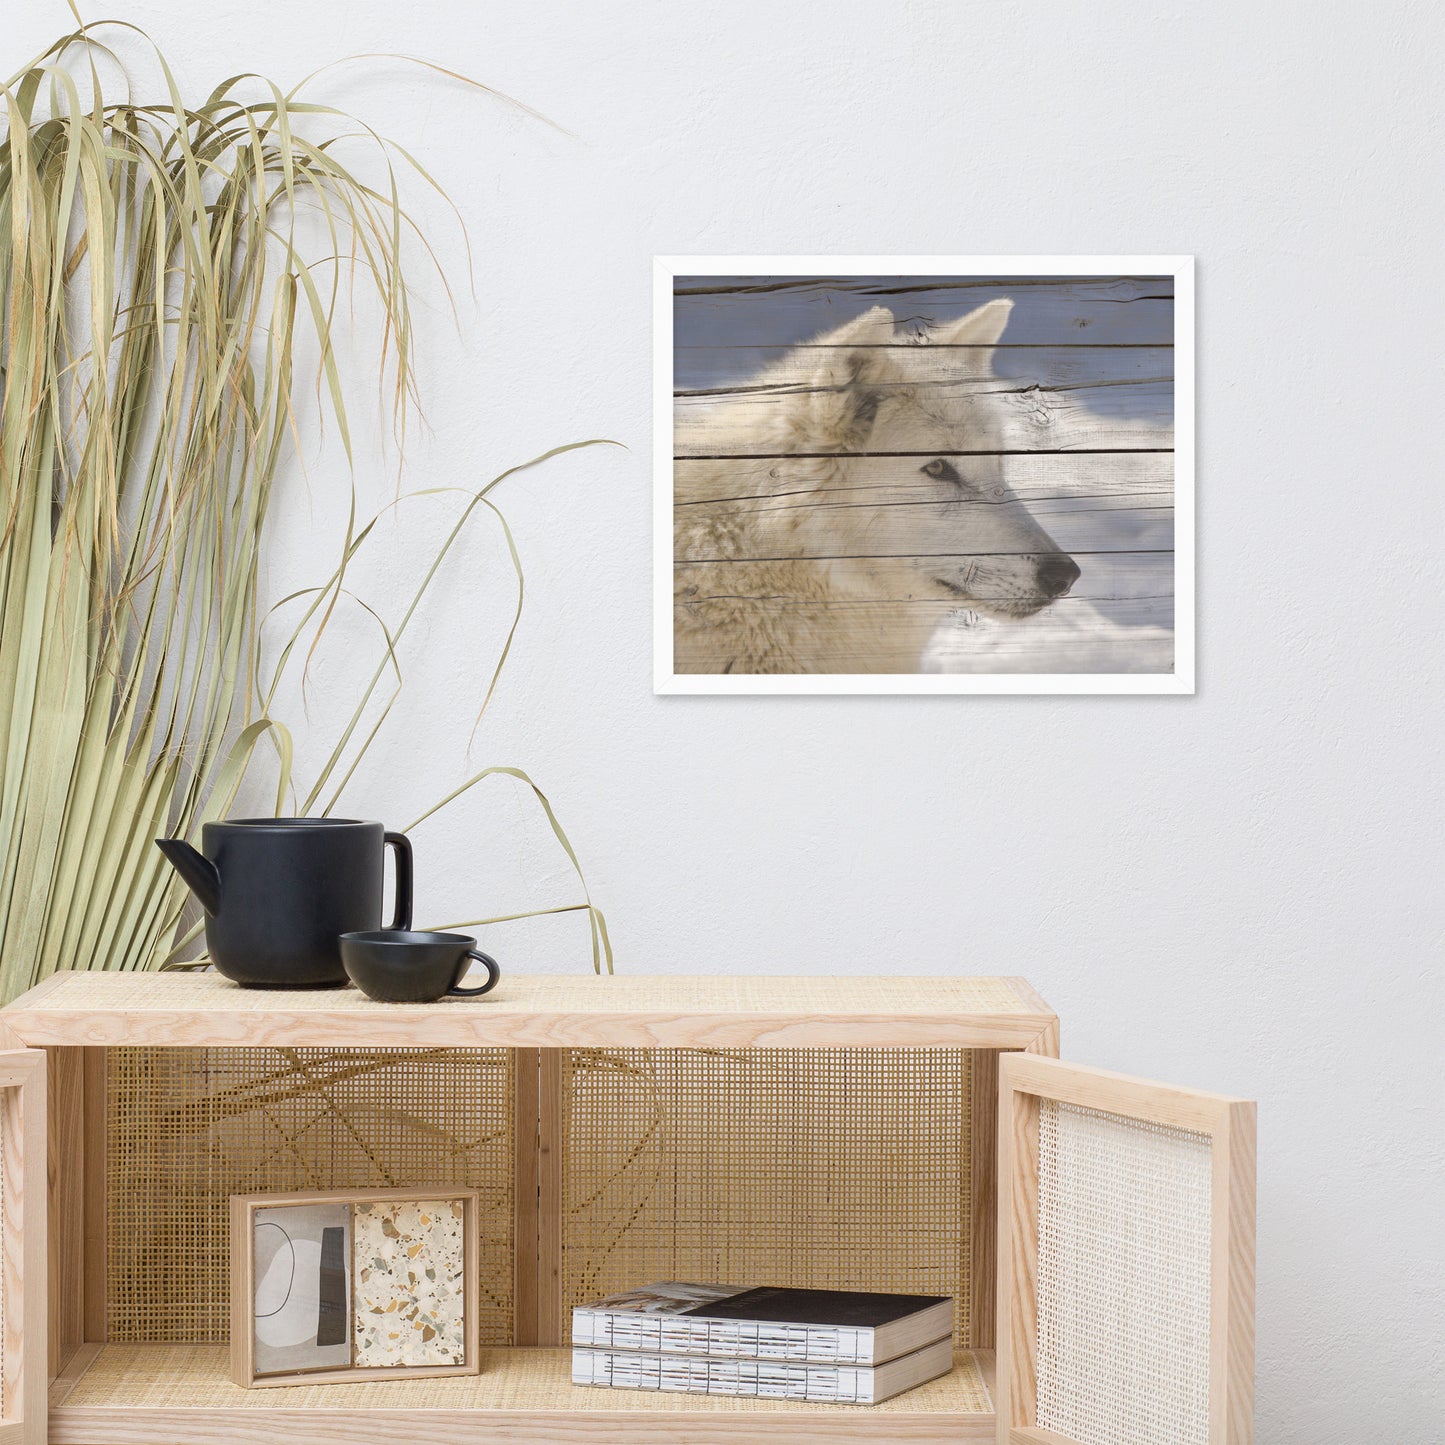 Modern Wall Kitchen Decor: Aries the White Wolf Portrait on Faux Weathered Wood Texture / Animal / Wildlife / Nature Photographic Artwork - Framed Artwork - Wall Decor